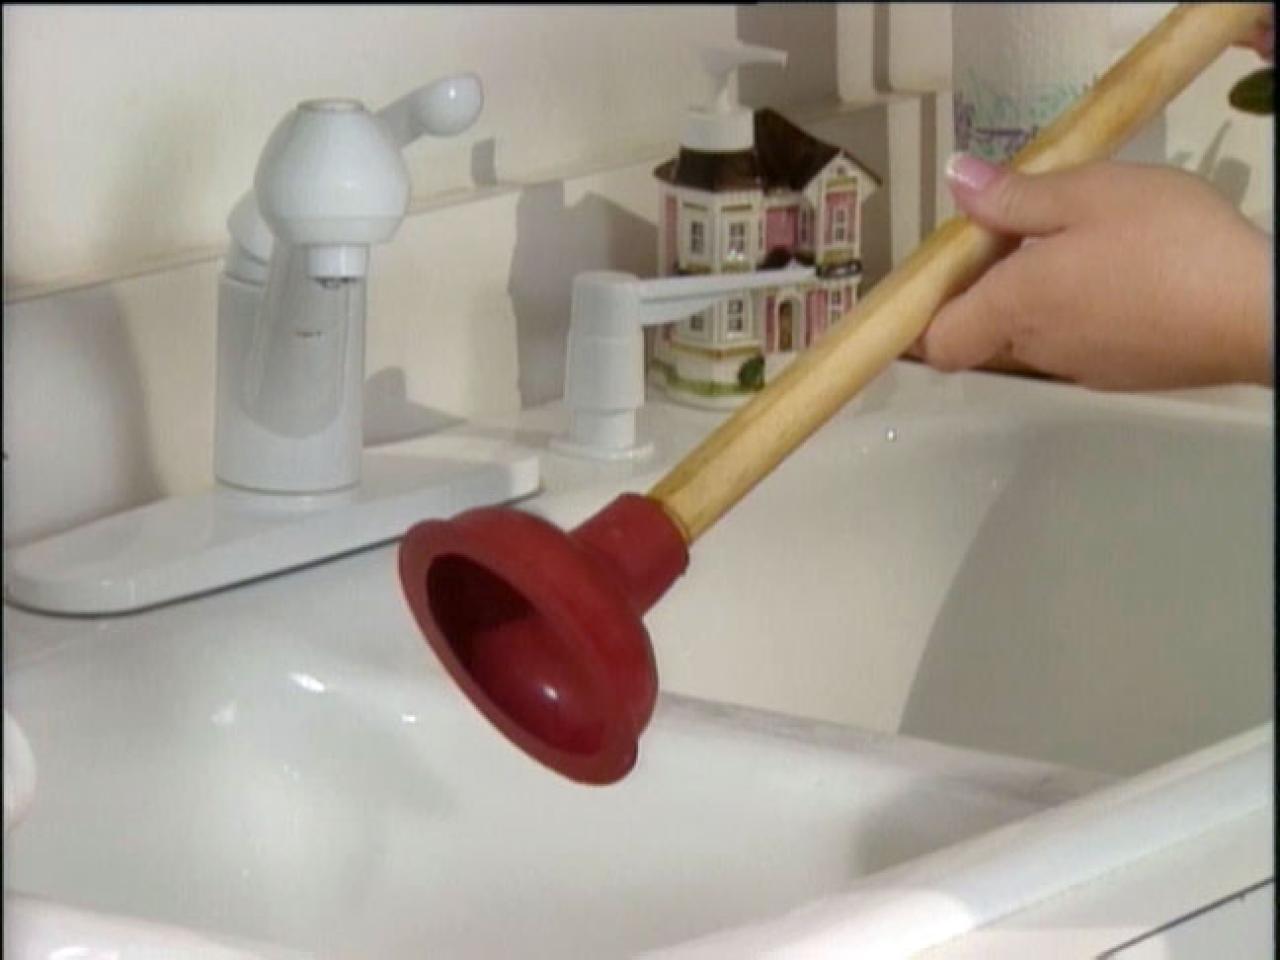 How can you unblock a sink without a plunger?